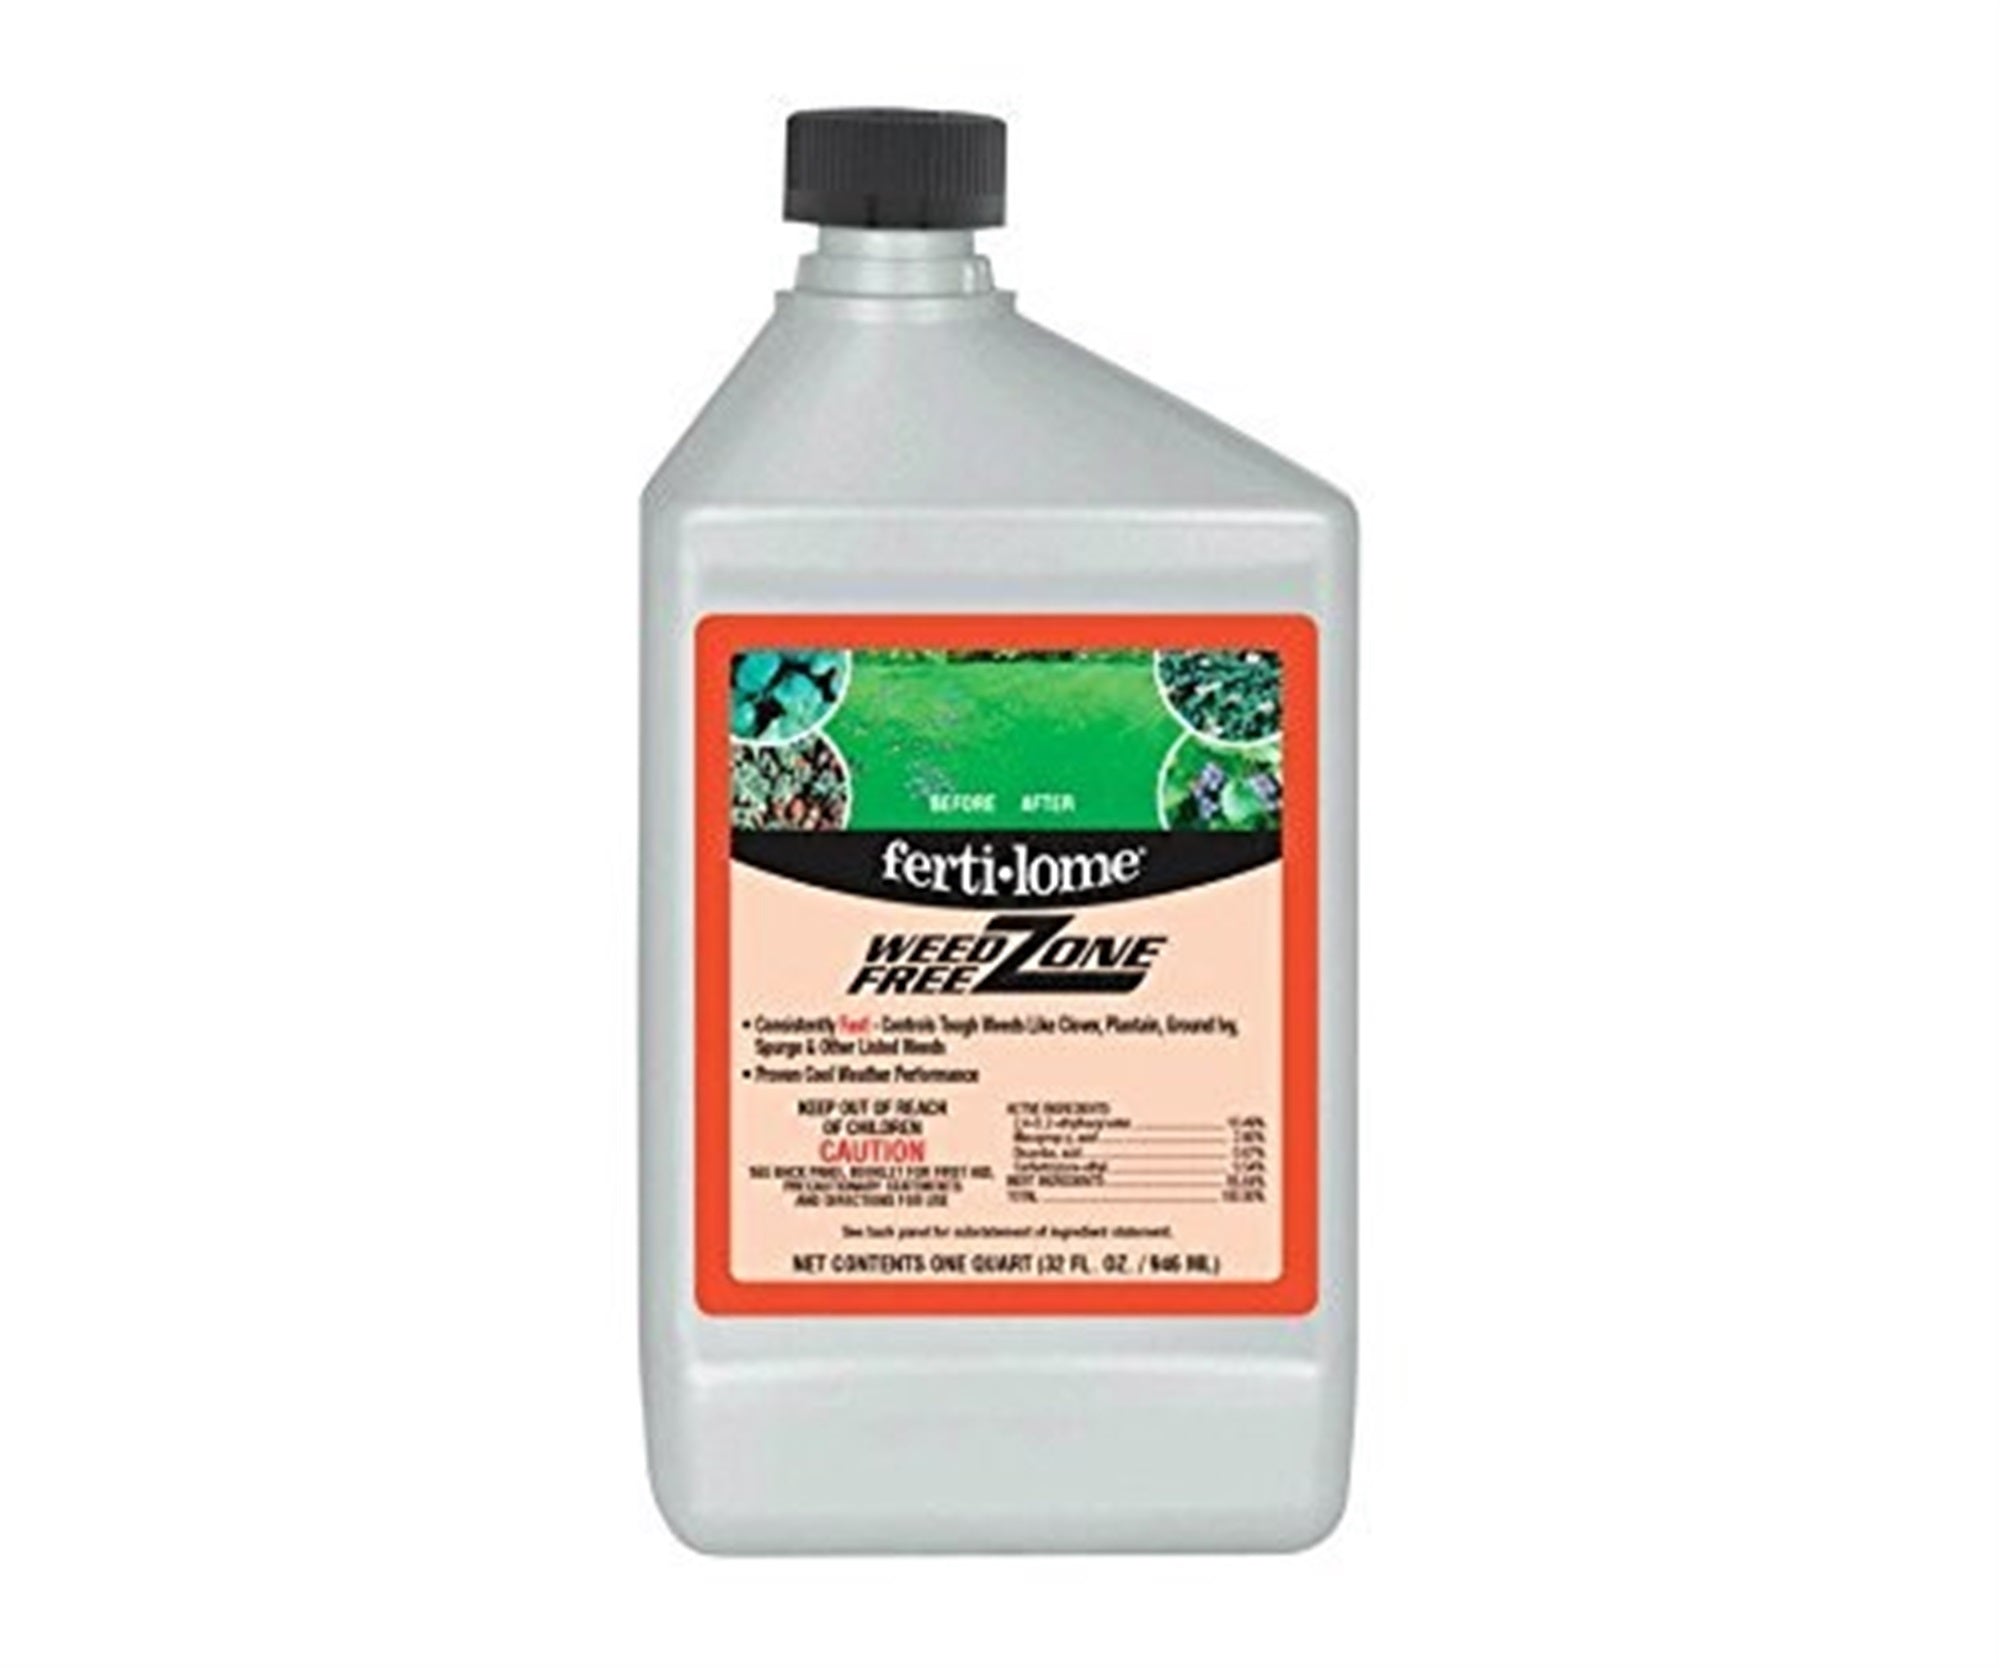 Fertilome Weed-Free Zone Weed Control Killer, Liquid Concentrate